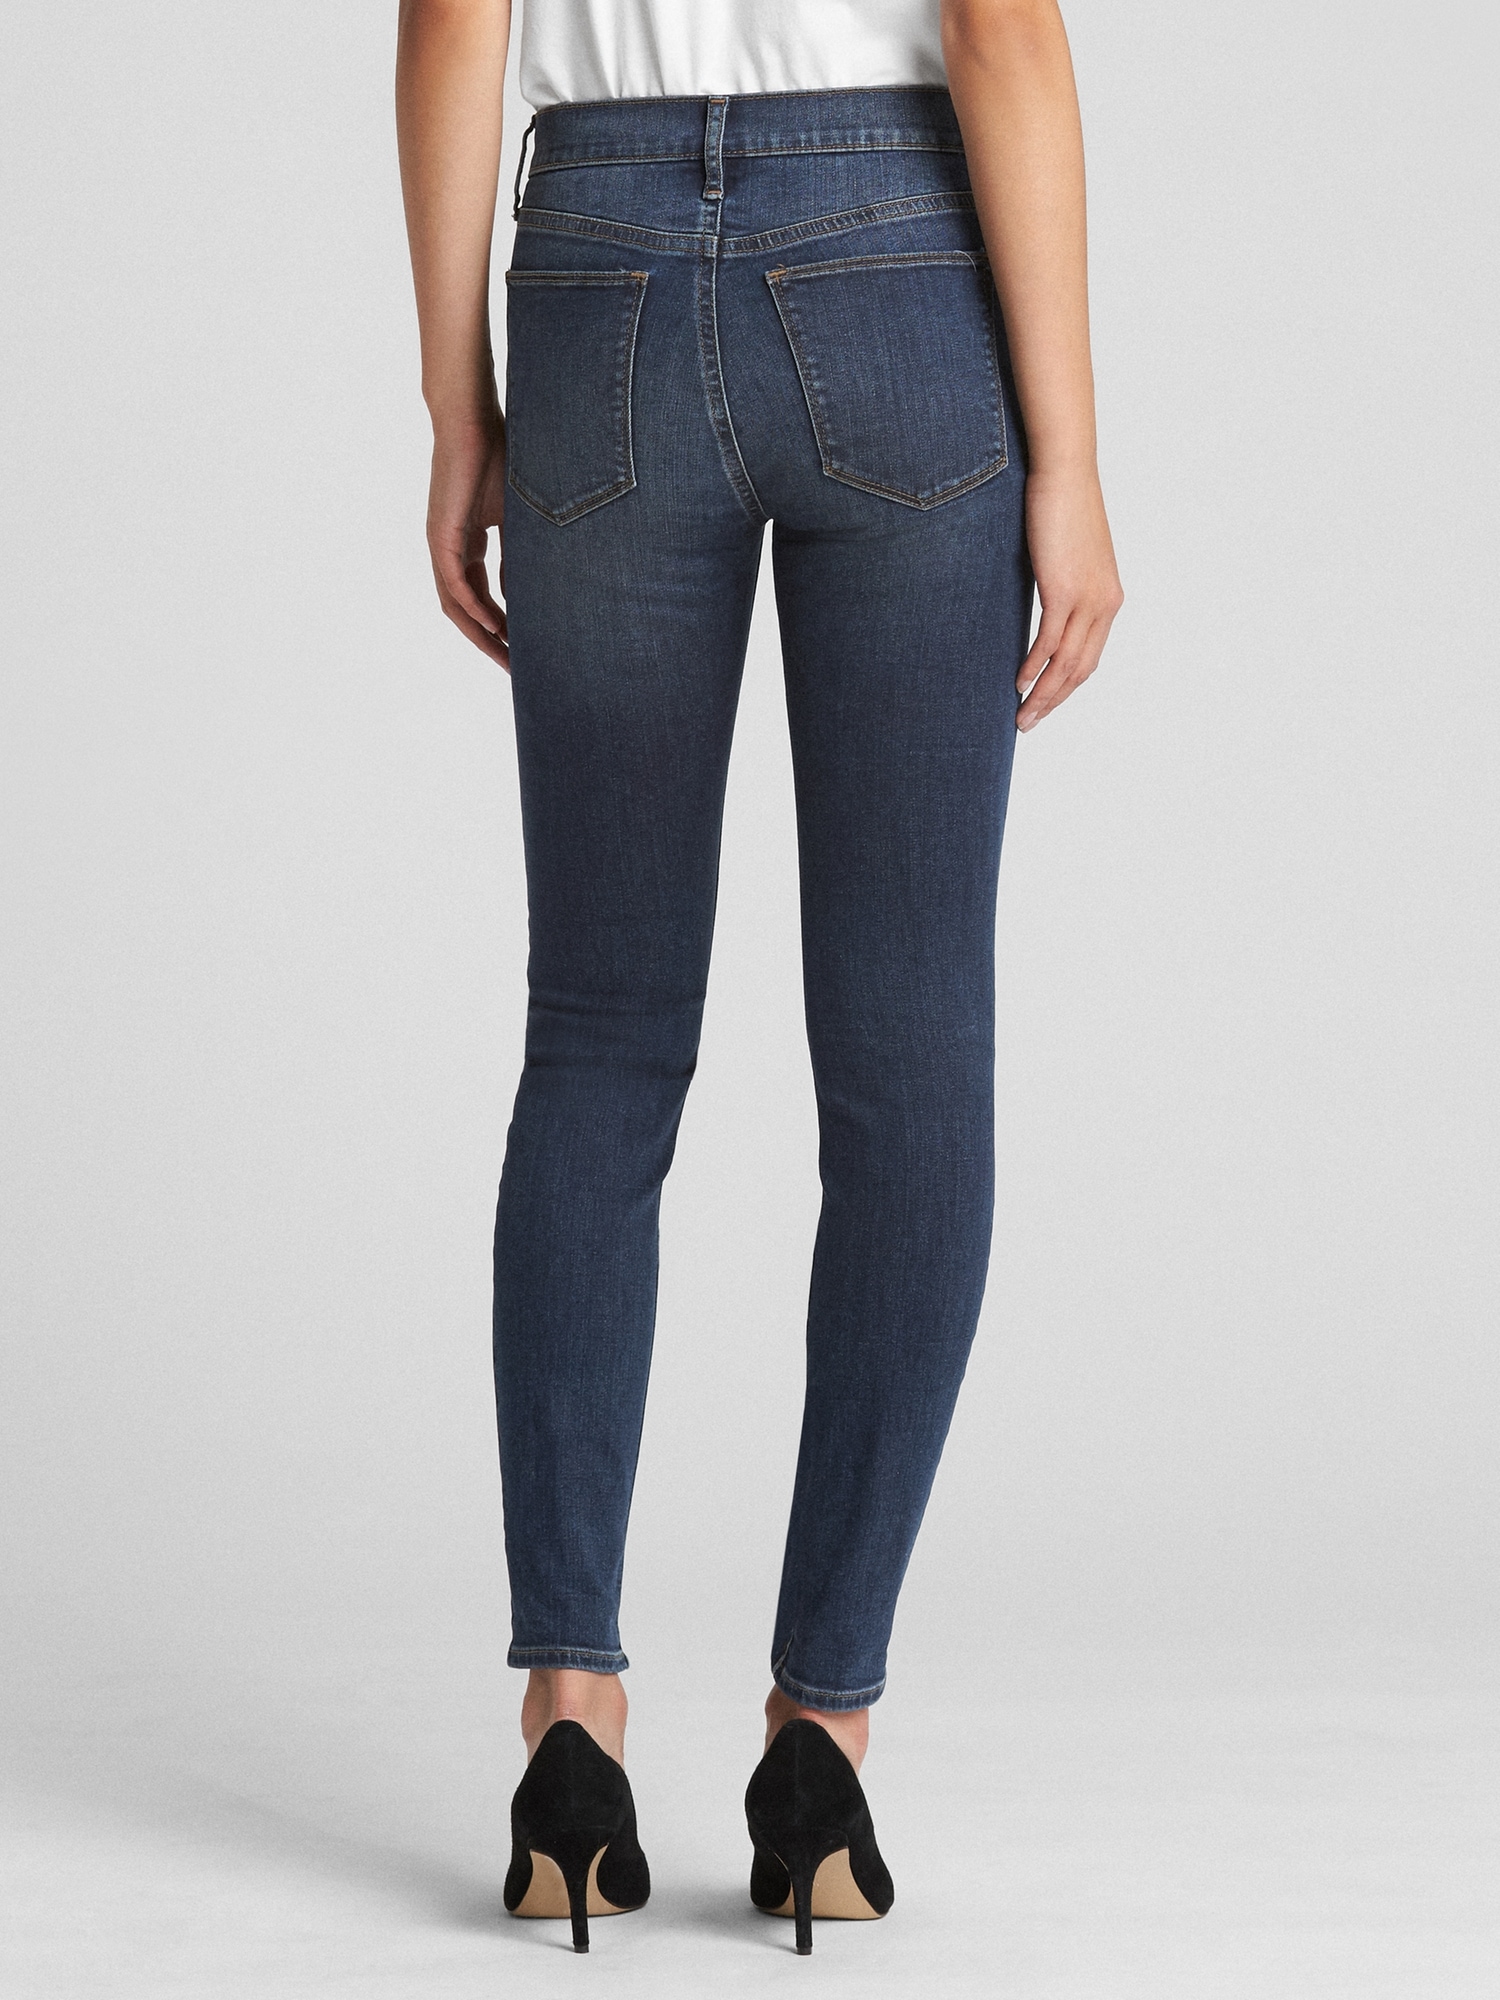 Mid Rise True Skinny Ankle Jeans | Gap